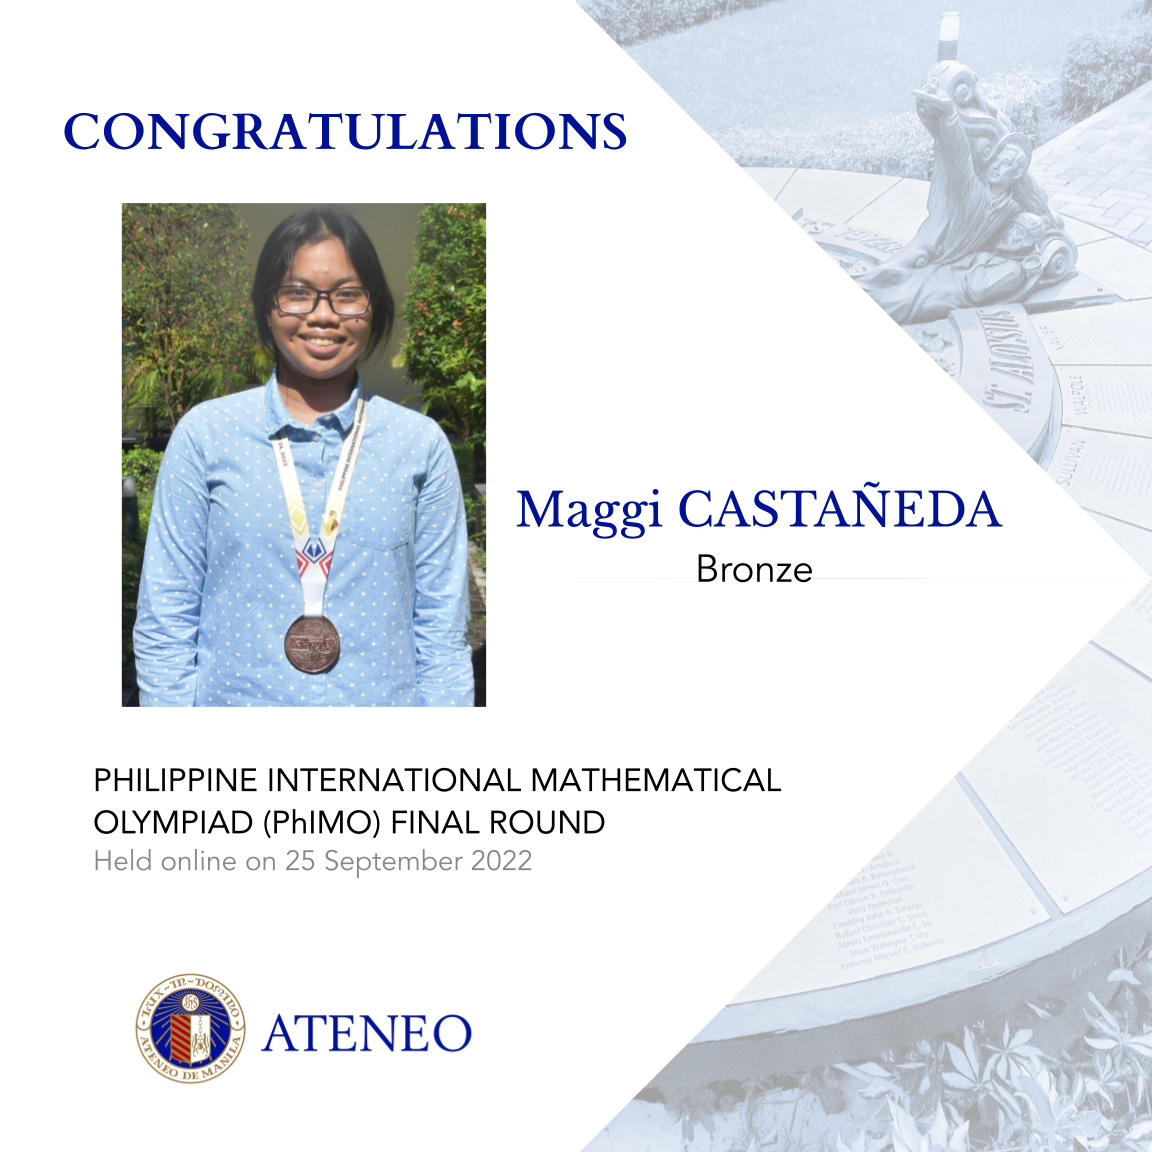 Maggi Castañeda was the only student from ASHS to win a medal at the PhIMO Final Round.